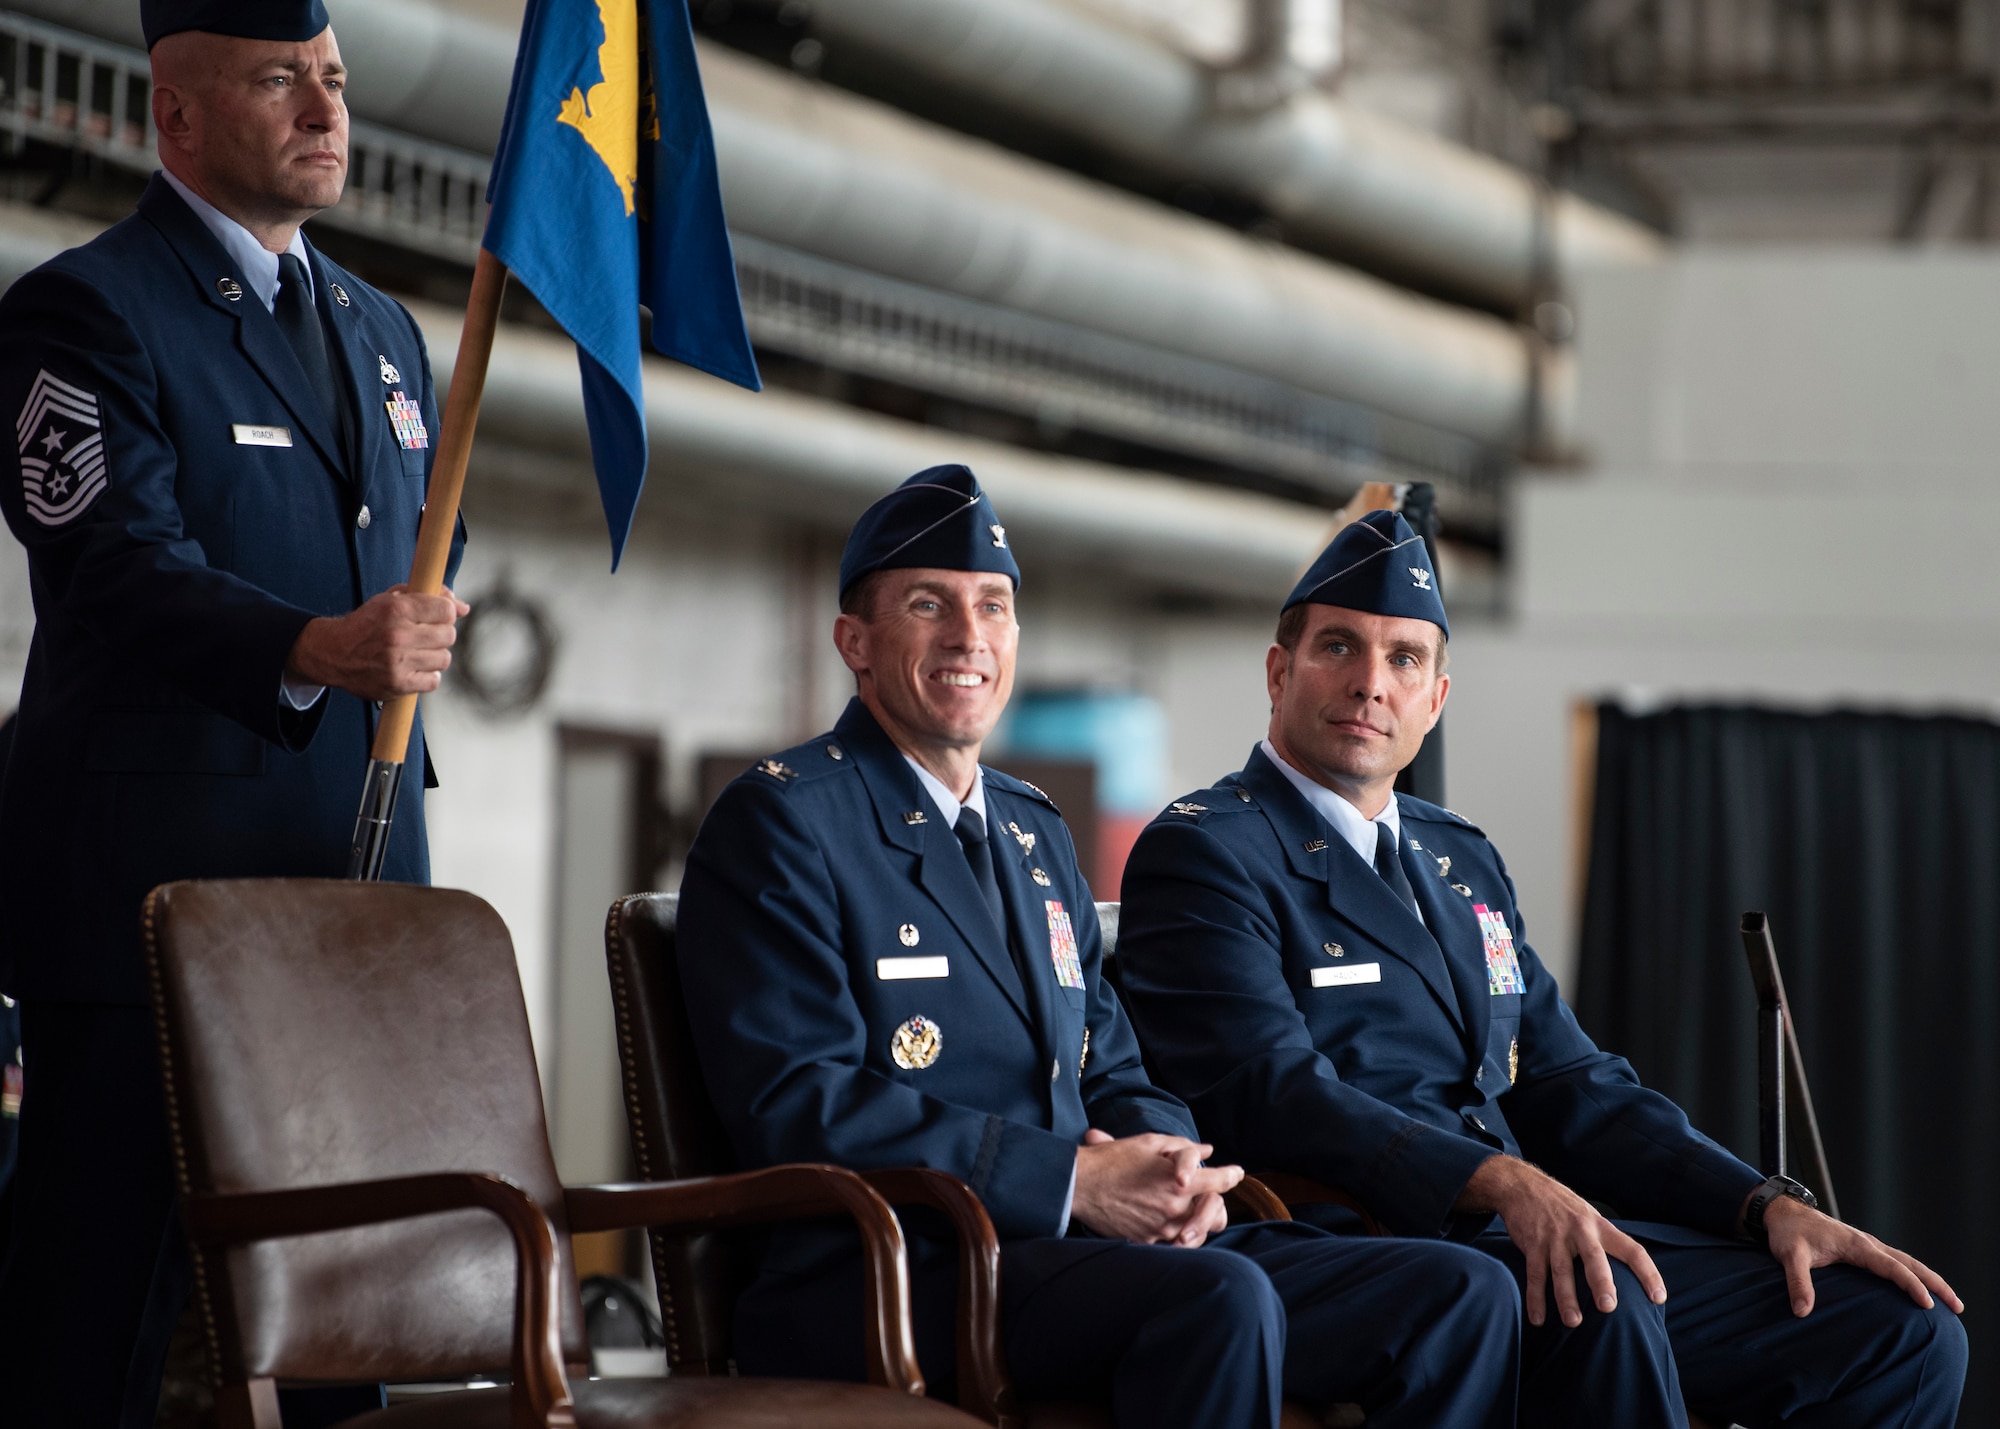 U.S. Air Force Chief Toby Roach, 52nd Fighter Wing command chief, (left), holds the guidon while Col. David Epperson, 52nd FW outgoing commander, (center), and Col. Leslie Hauck, 52nd FW incoming commander, listened to opening remarks from Maj. Gen. Randall Reed, Third Air Force commander, during the 52nd FW Change of Command ceremony July 15, 2021, on Spangdahlem Air Base, Germany. Hauck is a command pilot with more than 2,400 hours in the F-16 Fighting Falcon, including 285 combat hours in support of Operation Enduring Freedom. (U.S. Air Force photo by Staff Sgt. Melody W. Howley)